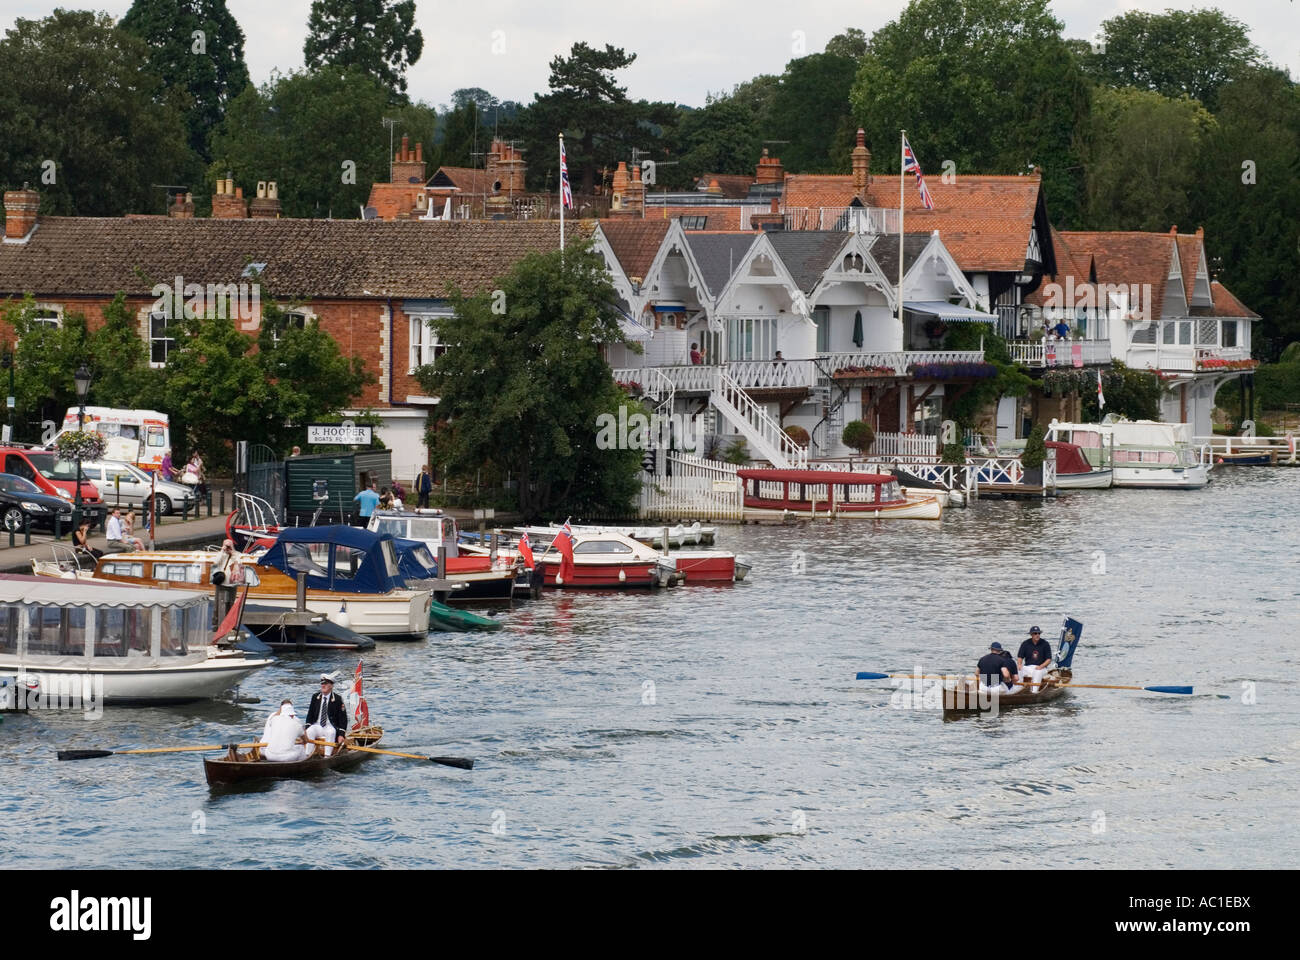 Swan Upping The River Thames Henley on Thames Oxfordshire  England  The Vintners and Dyers Company skiffs 2000s 20007 HOMER SYKES Stock Photo